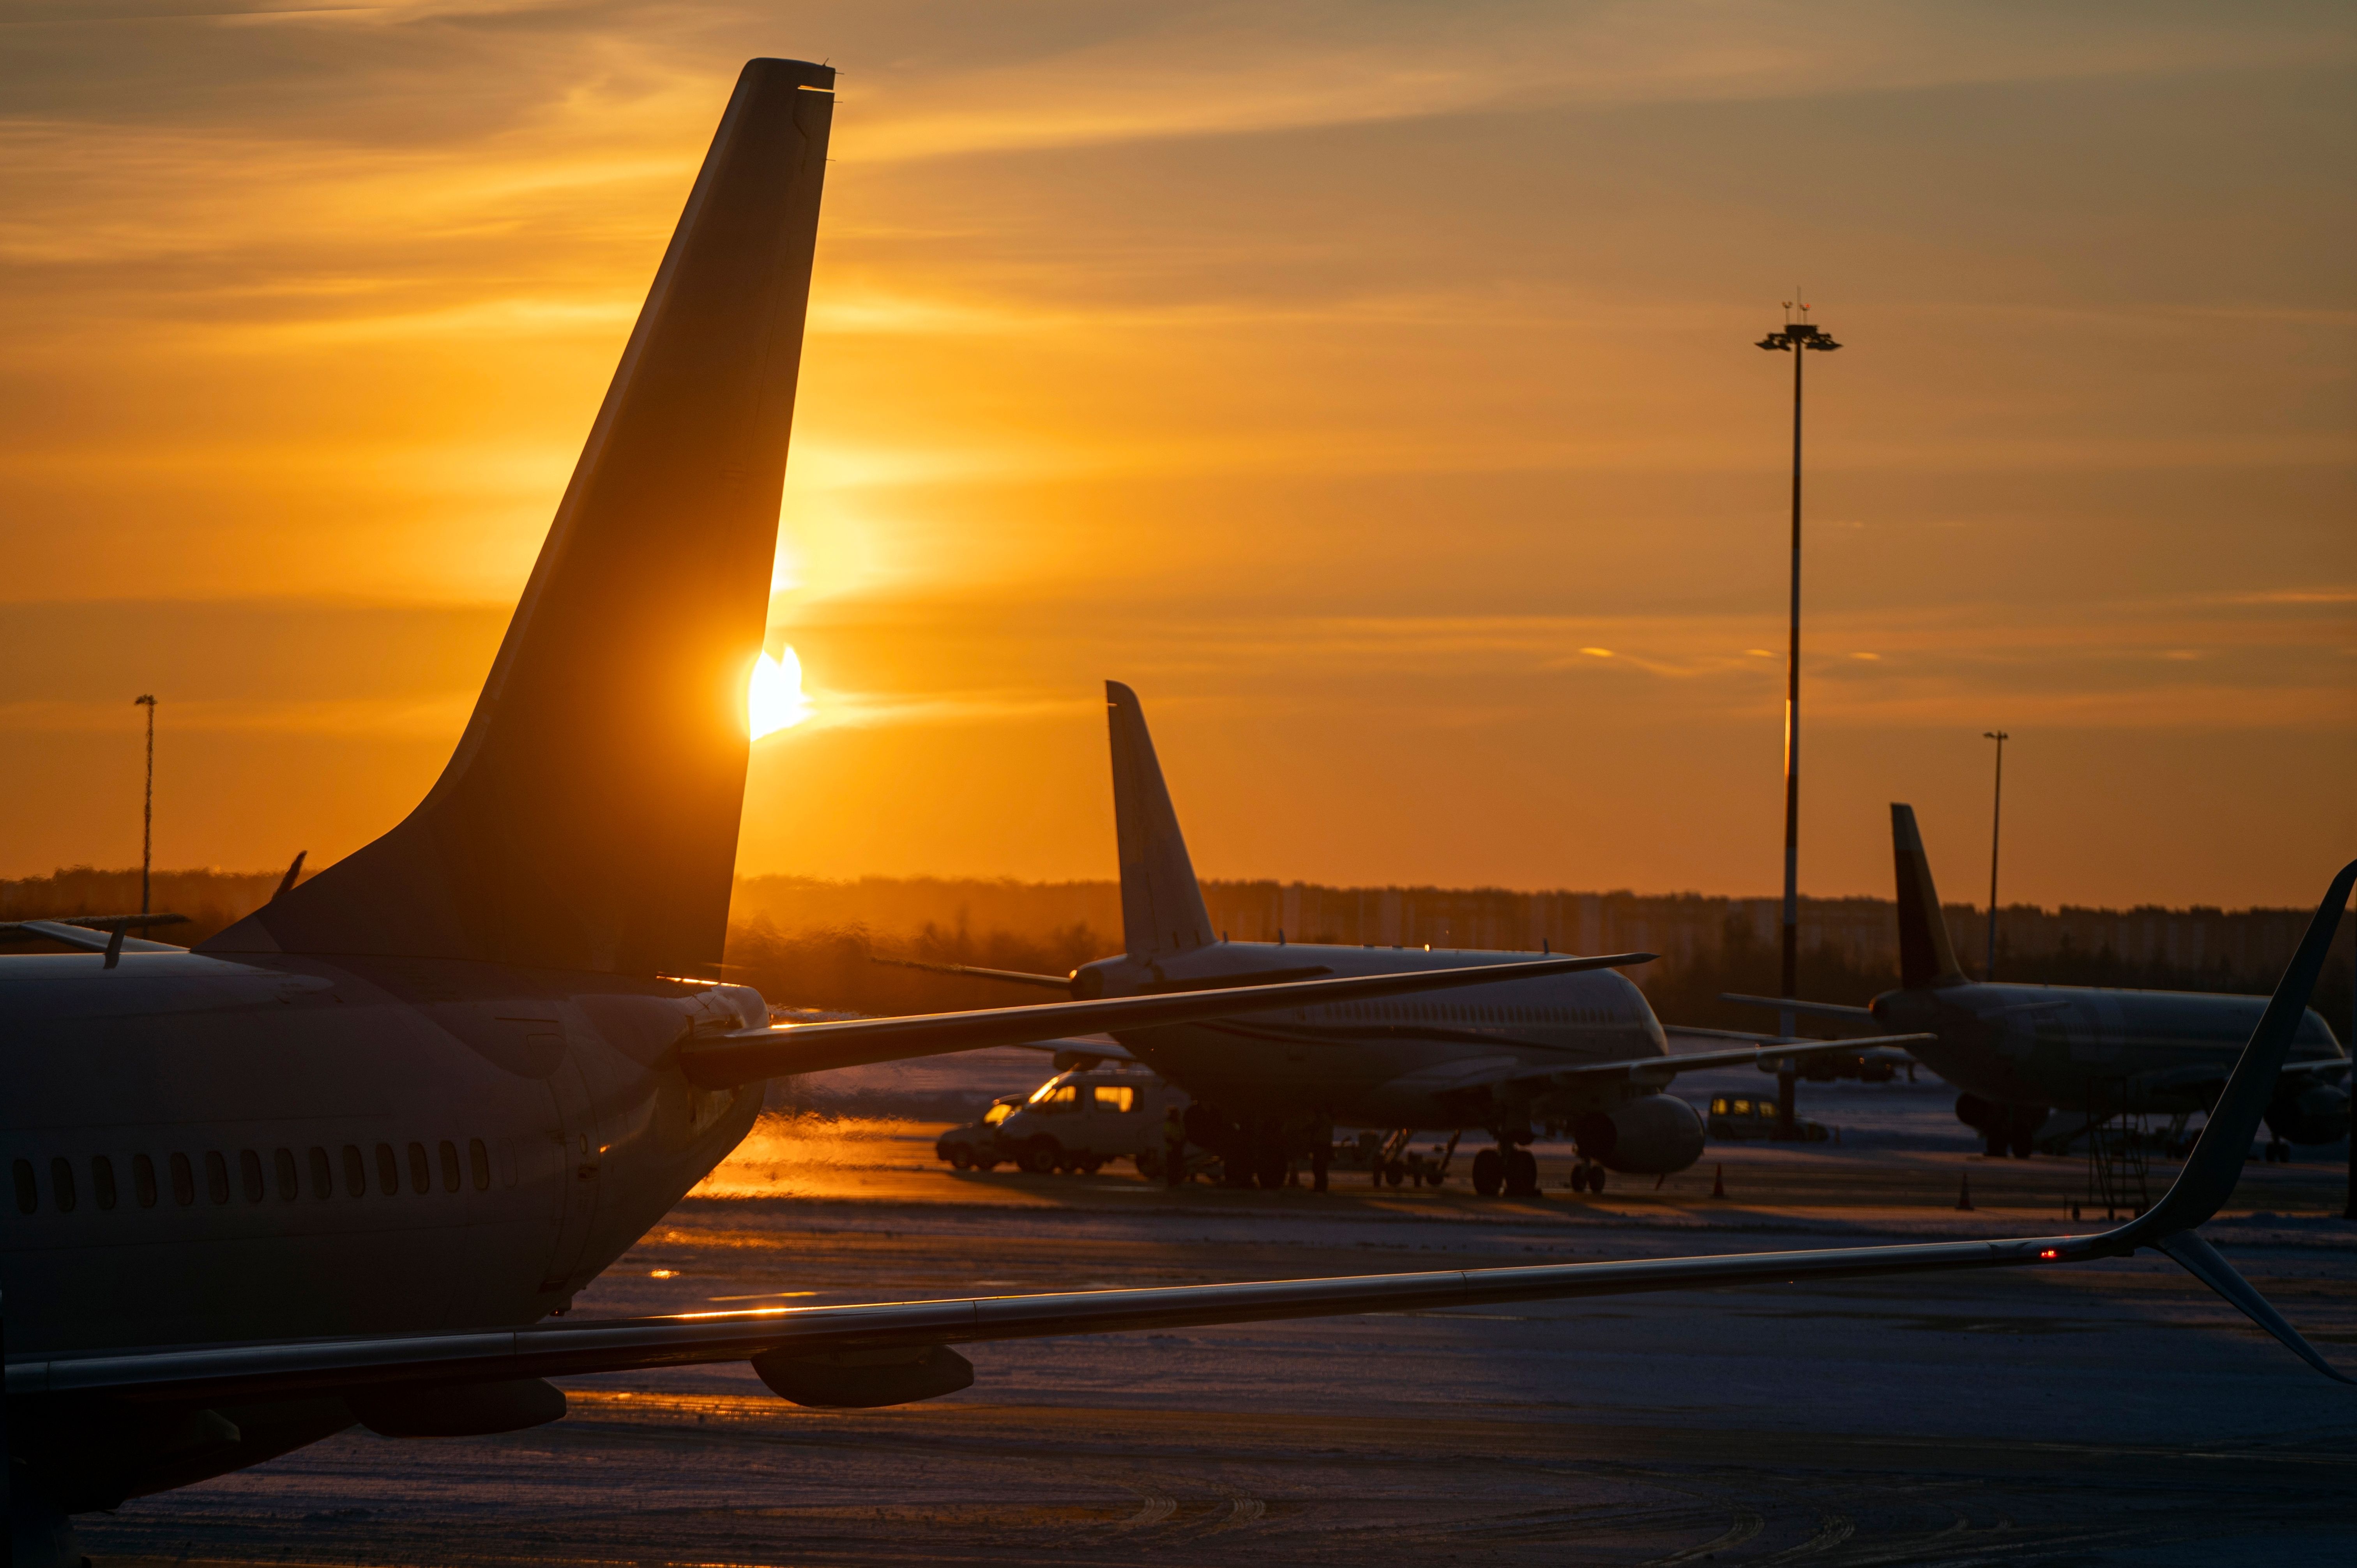 Silhouettes of the airplanes with Tails at airport during bright yellow sunset, concept picture about transport as background